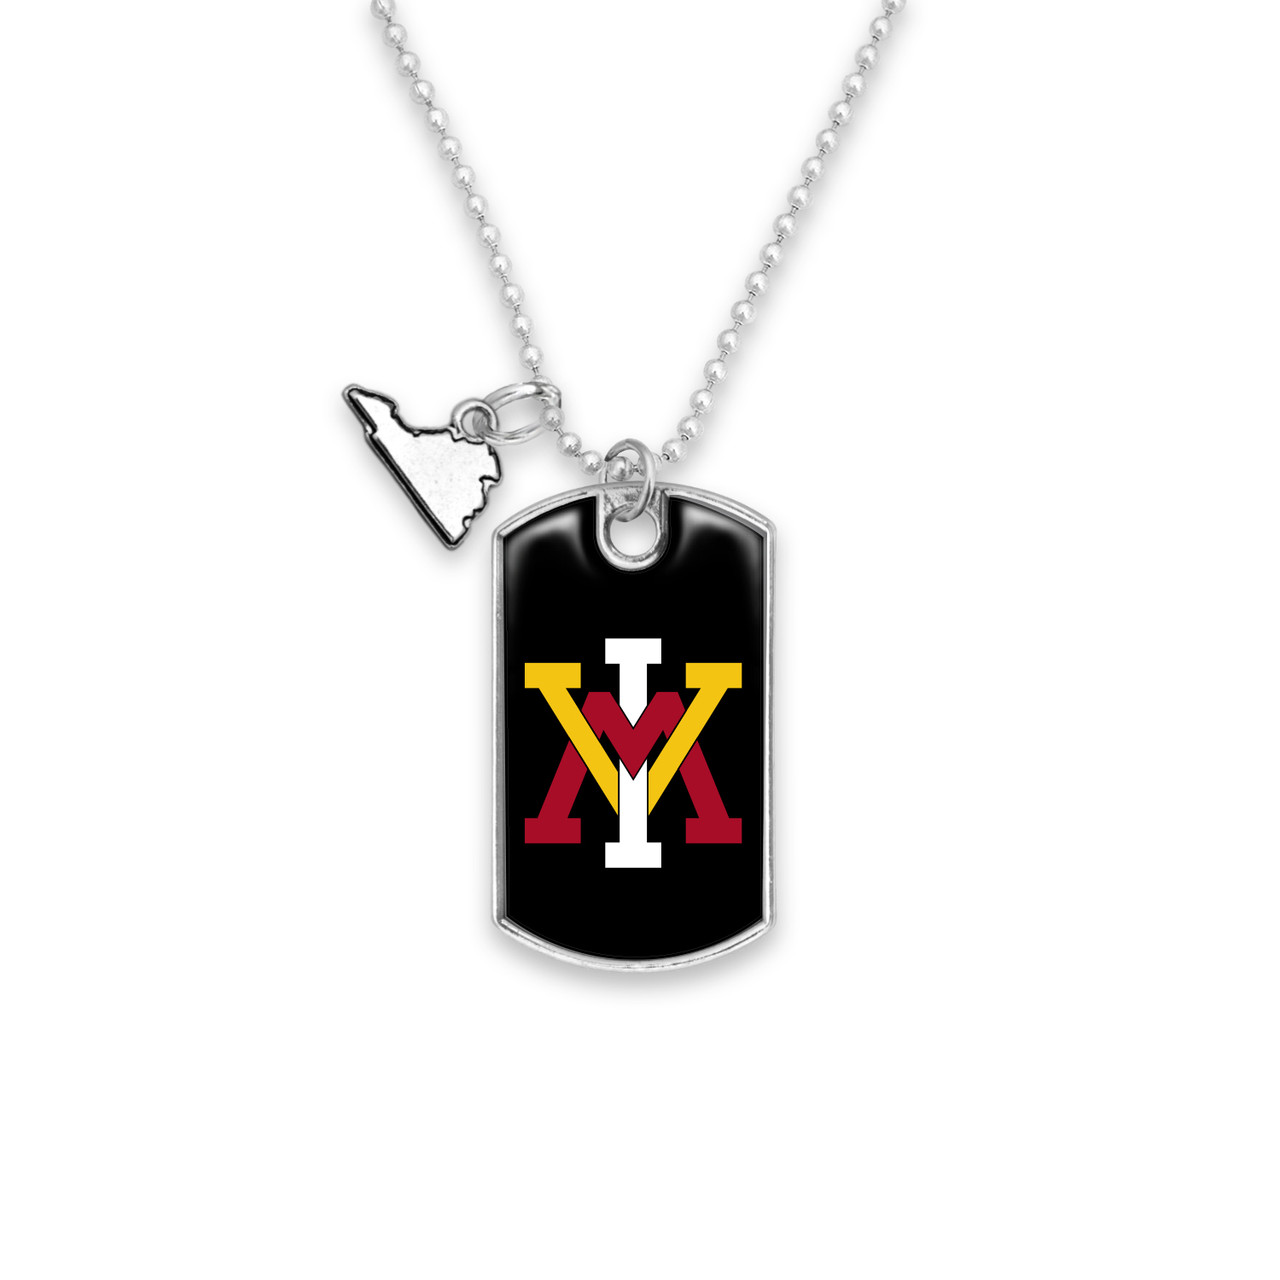 Virginia Military Keydets Car Charm- Rear View Mirror Dog Tag with State Charm